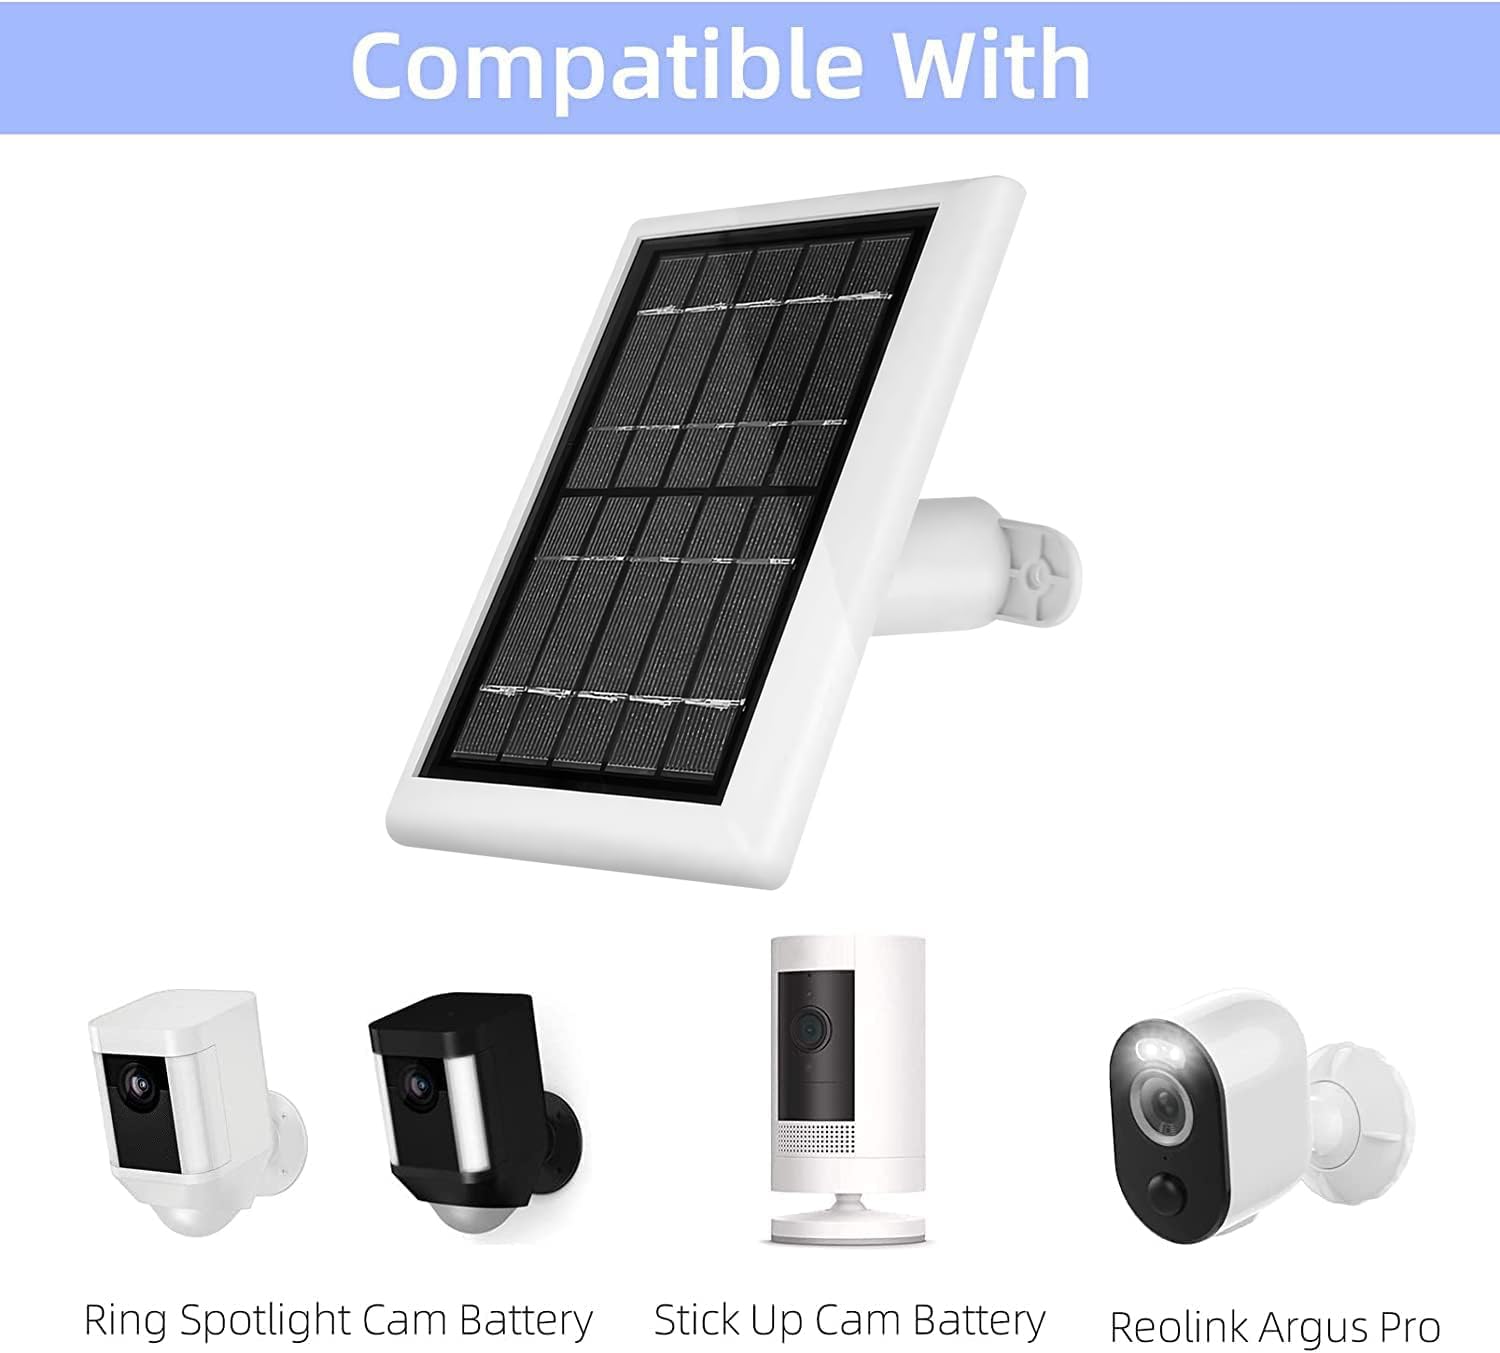 Ring Camera Solar Panel Charger,5W Solar Panels for Ring Stick Up Cam/Ring Spotlight Cam Battery/Spotlight Cam Plus/Spotlight Cam Pro/Outdoor Wireless Security Camera (1, White)